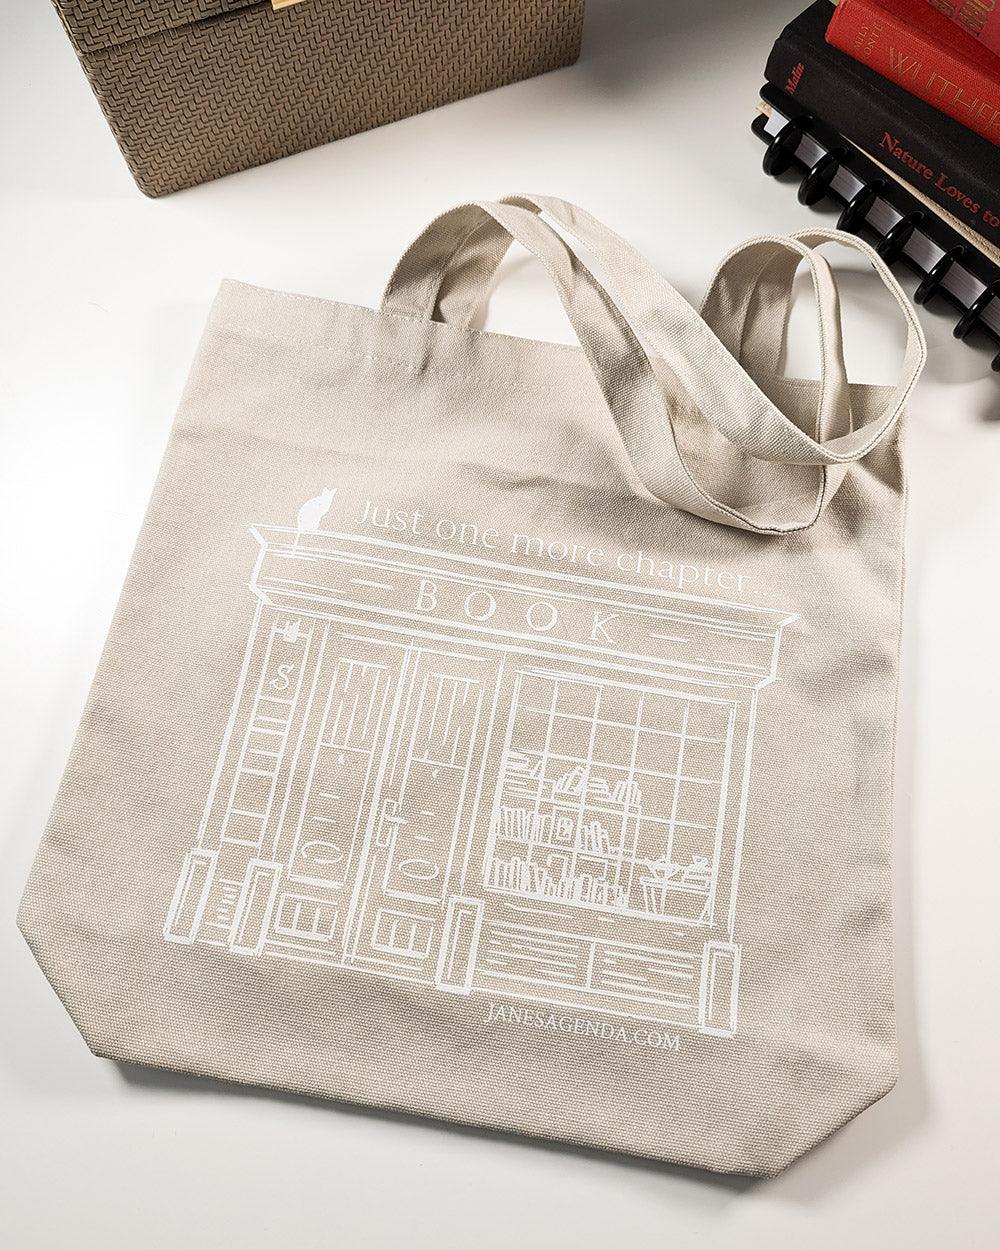 Library tote bag with a cute image and quote by Jane's Agenda.